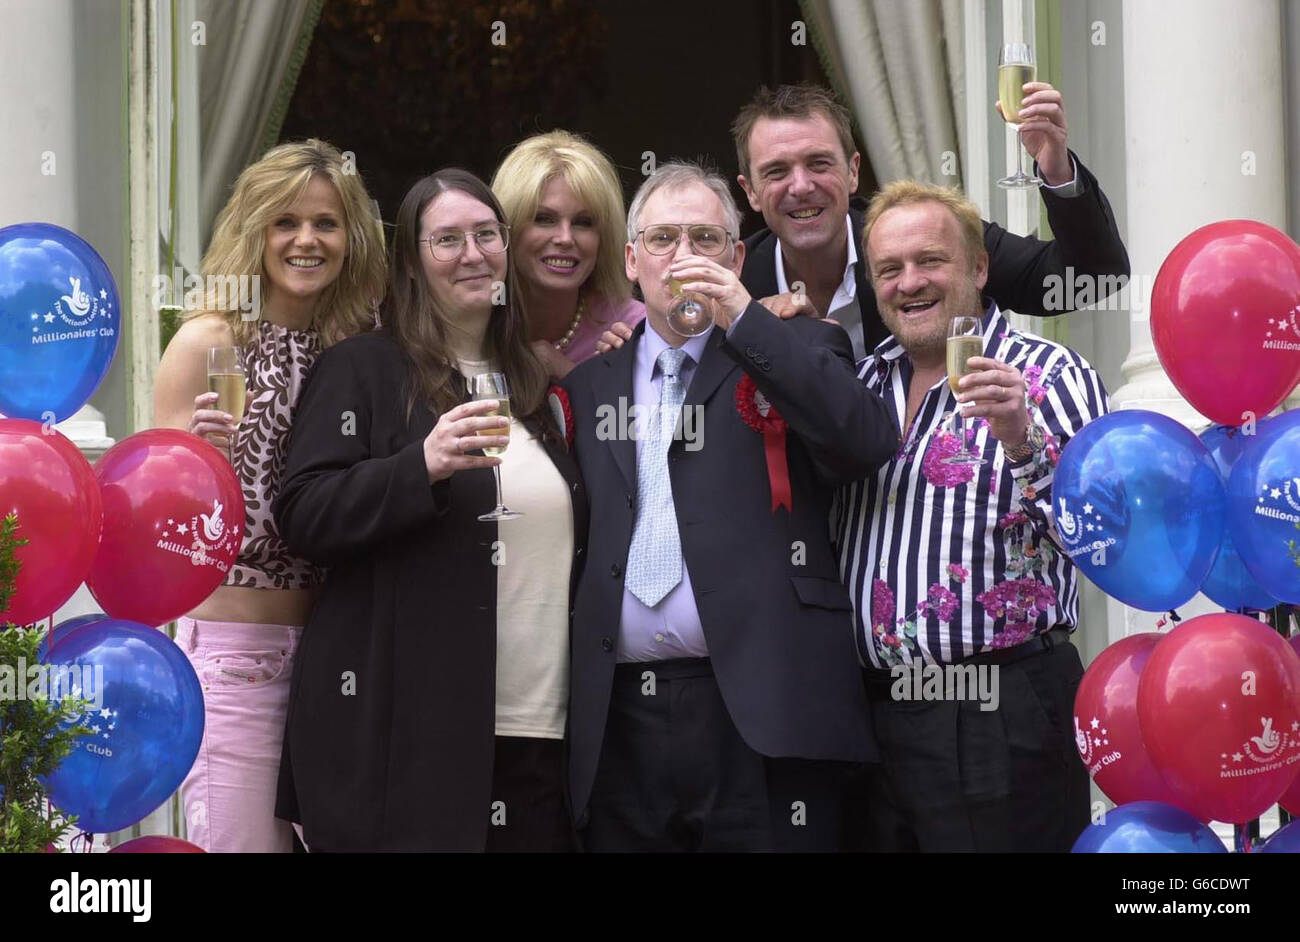 Television celebrities Anthony Worrall Thompson, Joanna Lumley, Phil Tufnell and Linda Barker join the 1,500th member of its millionaire club, Tim Davis, from Torquay, and his wife Eileen, in west London. * The event included more than 30 National Lottery millionaires to mark the 1,500th lottery millionaire last Wednesday when Mr Davis scooped the 3,168,574 Lotto jackpot. Stock Photo